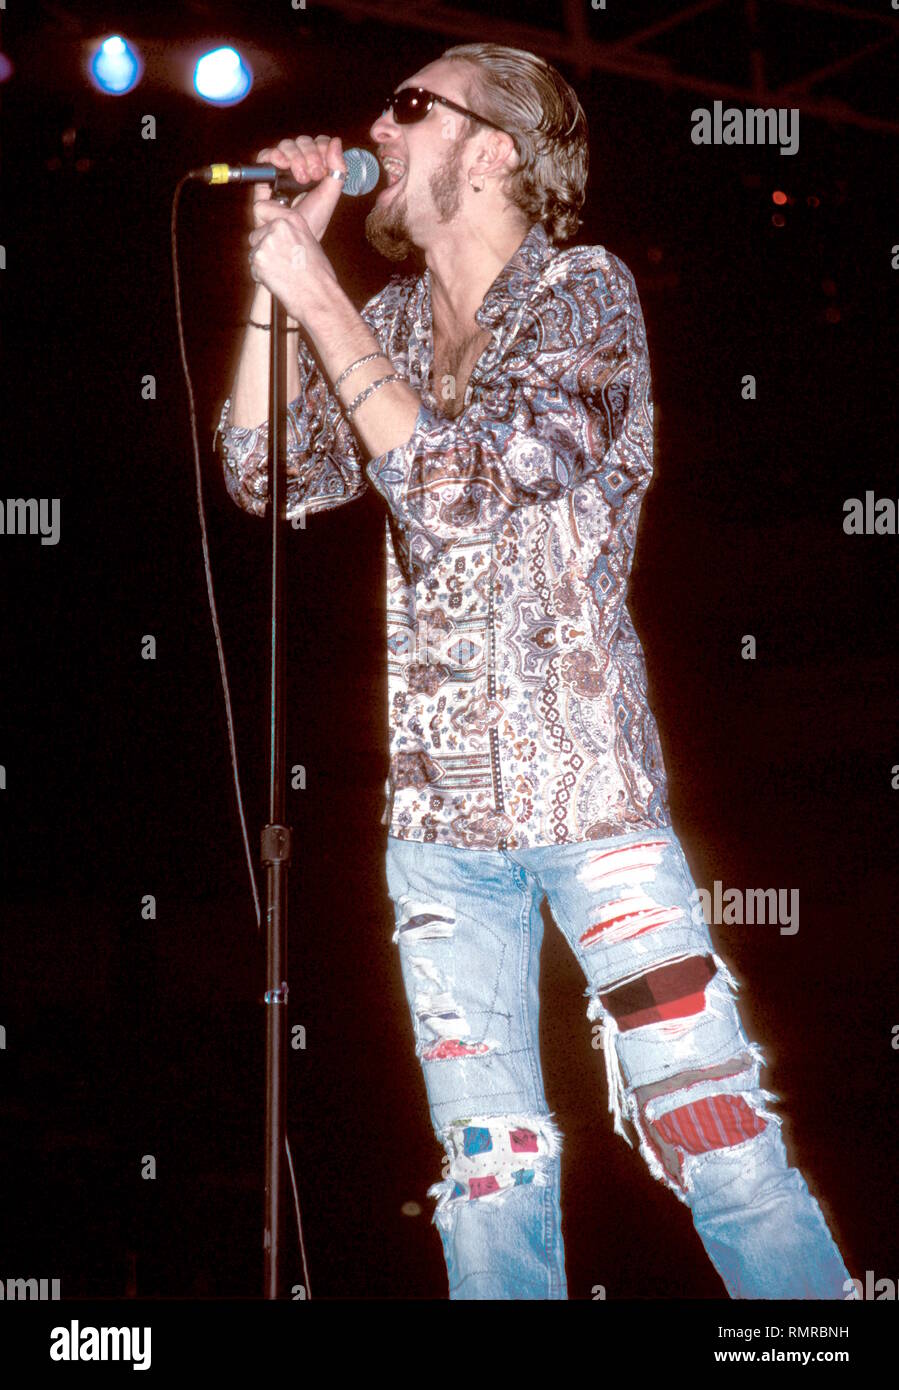 Alice In Chains vocalist Layne Staley is shown performing "live" in concert  Stock Photo - Alamy